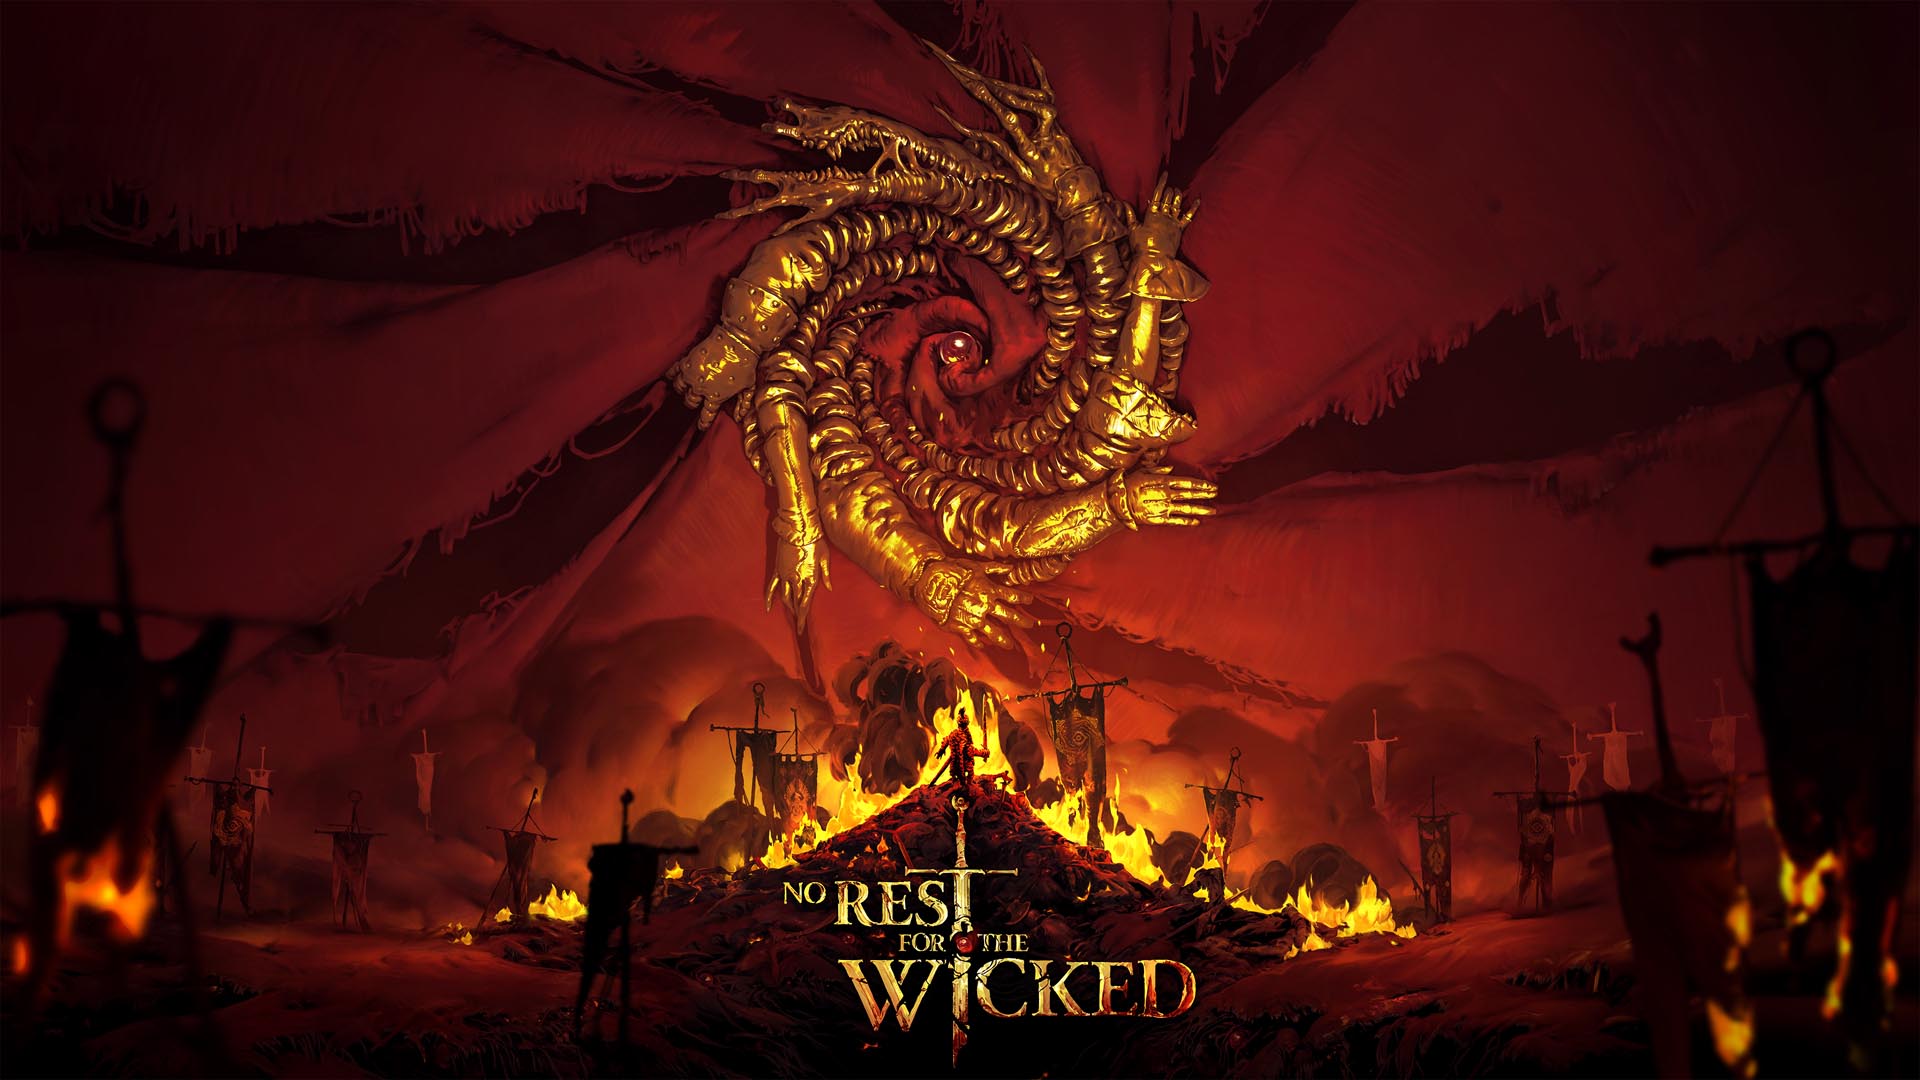 Moon Studios 宣布动作角色扮演游戏《No Rest for the Wicked》 - MonsterVine